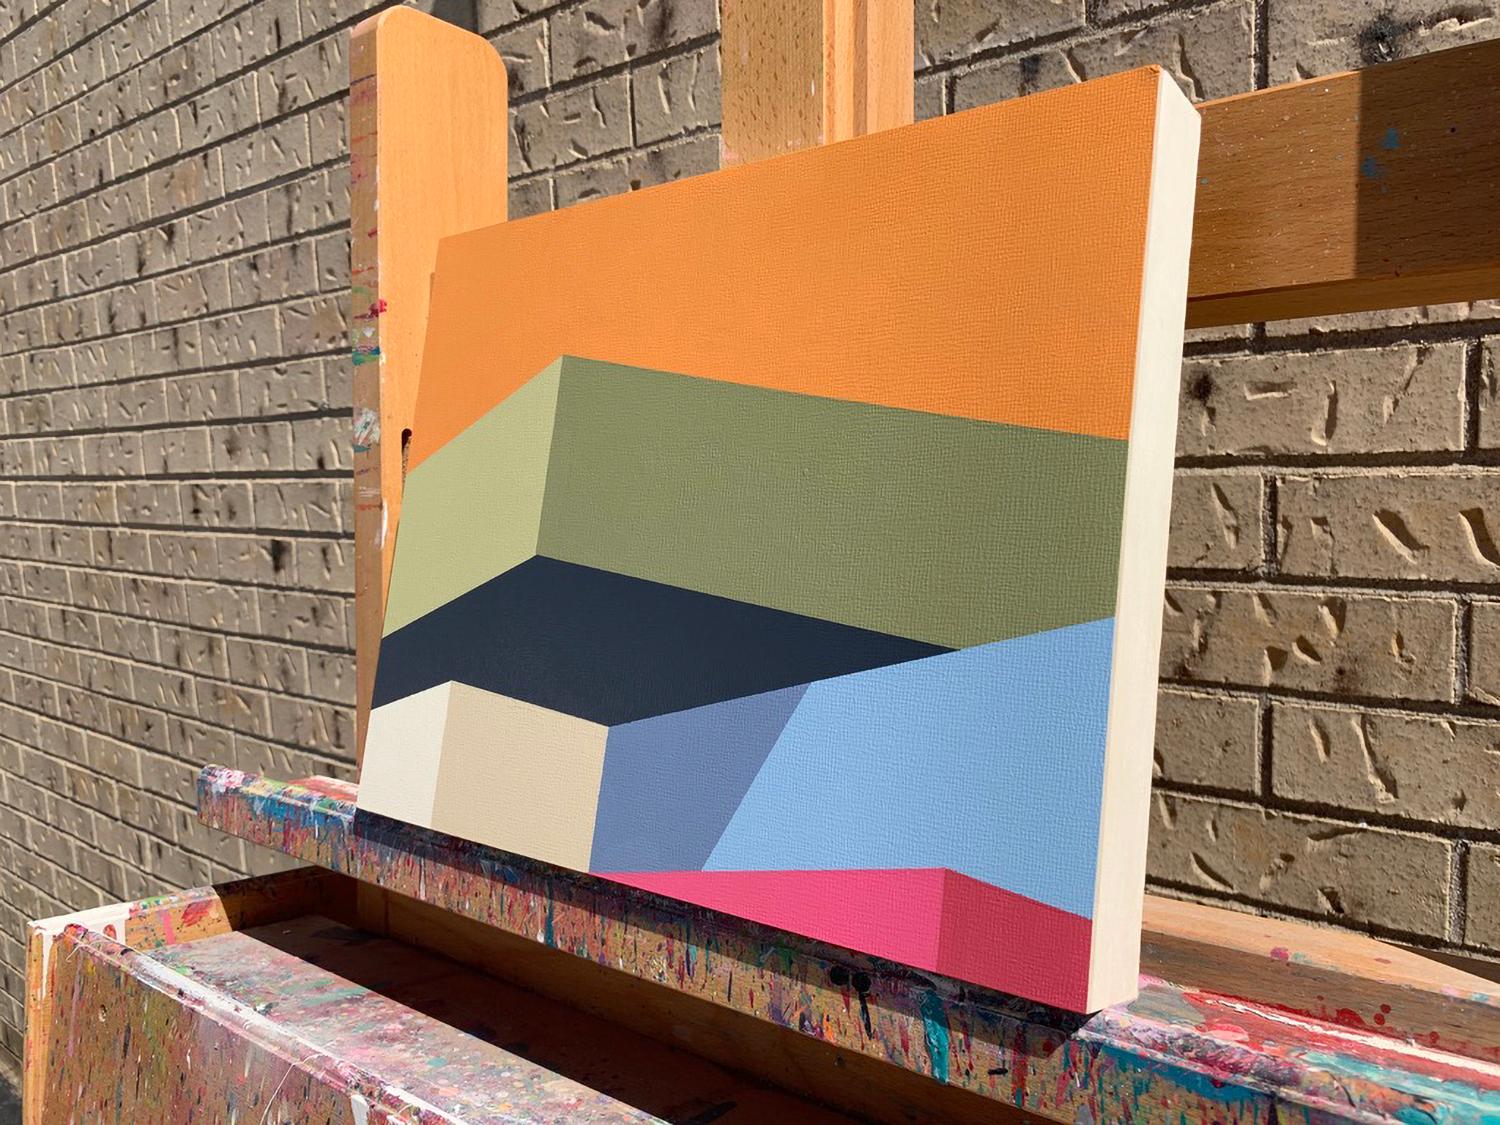 <p>Artist Comments<br>Artist Craig Rouse depicts a simplified scene of abstracted geometry. He paints polished angular structures in solid shades of blue, pink, and orange. The reimagined architecture forms playful relationships with light and